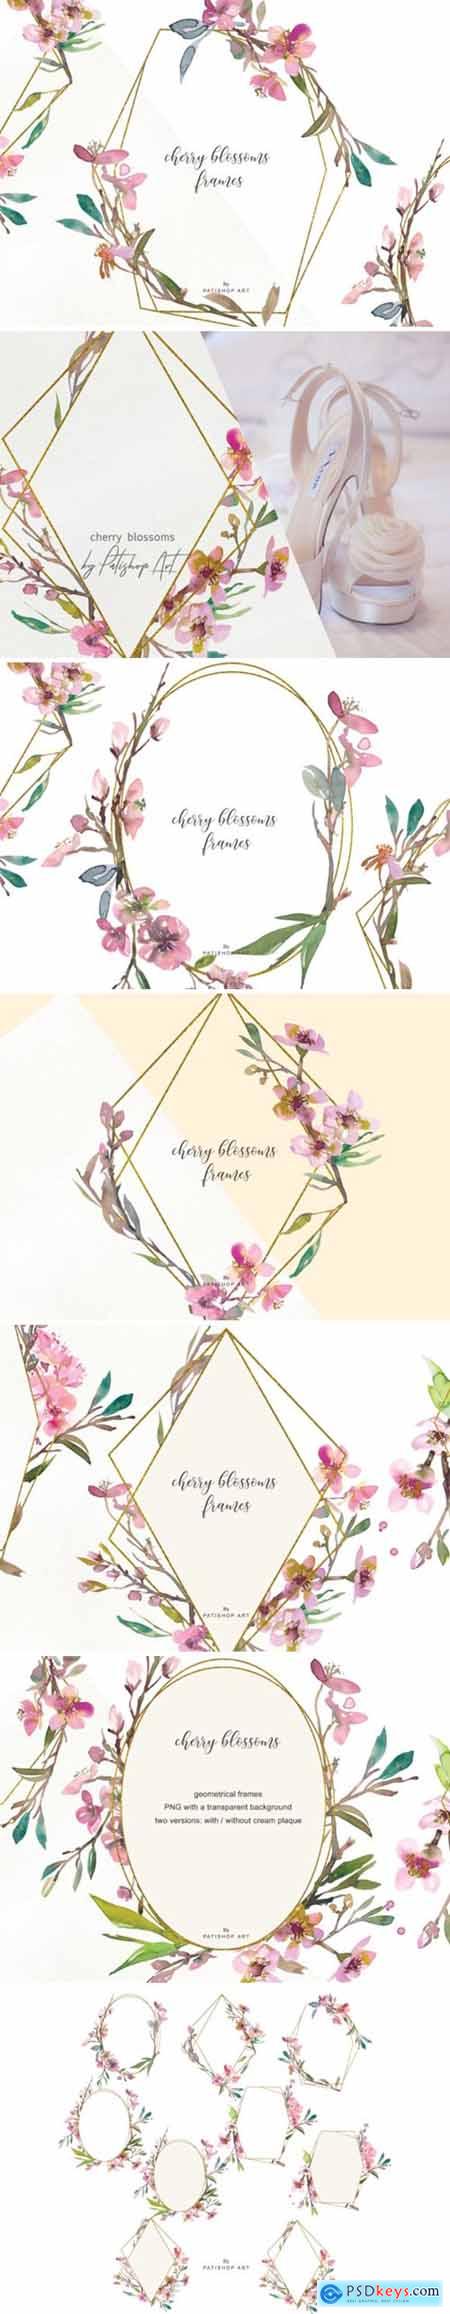 Watercolor Cherry Blossoms Frames 1585475